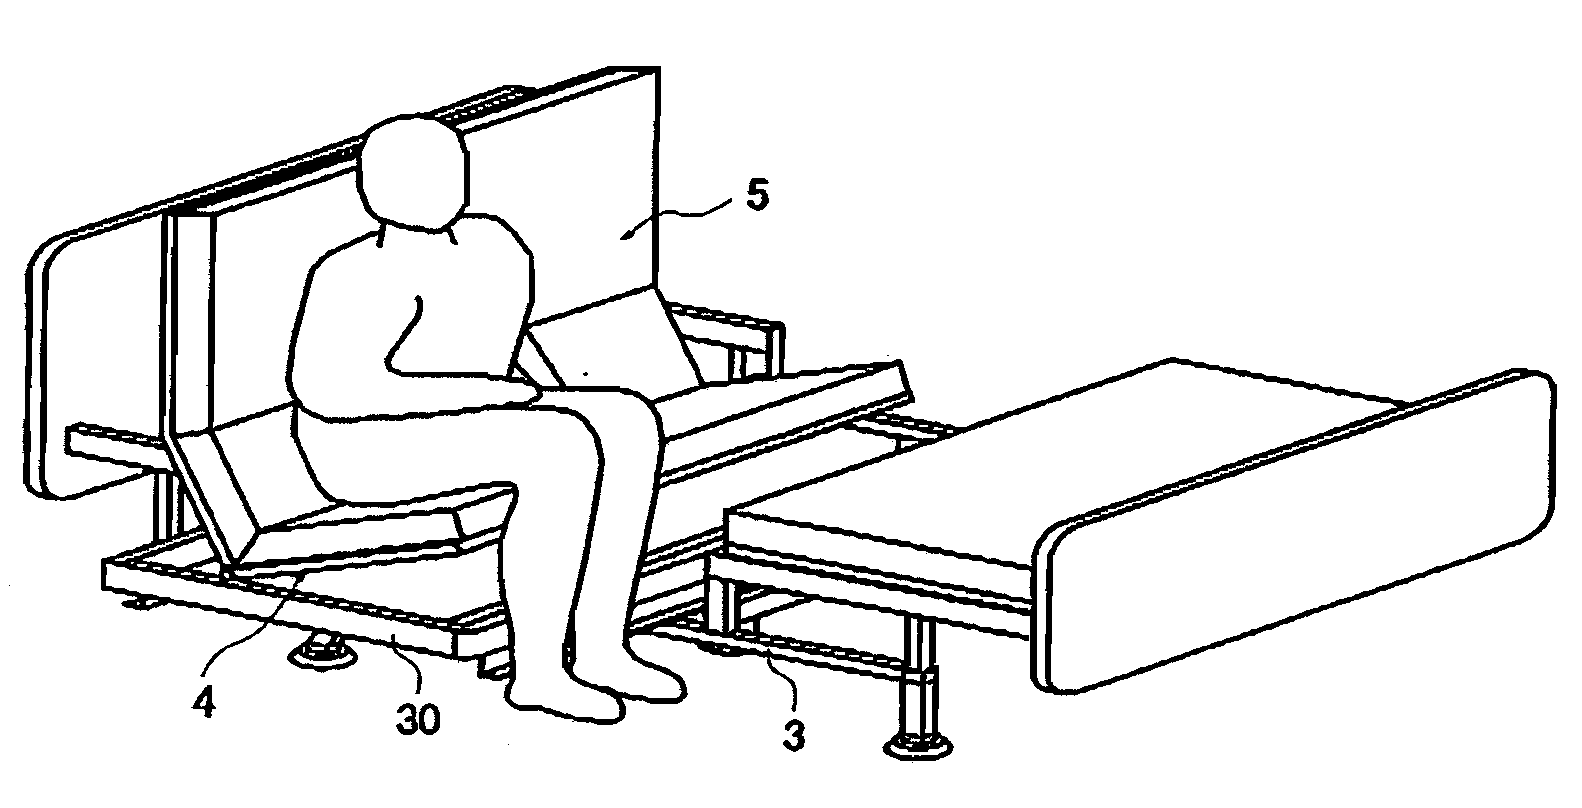 Bed for allowing posture for sitting on chair to be taken